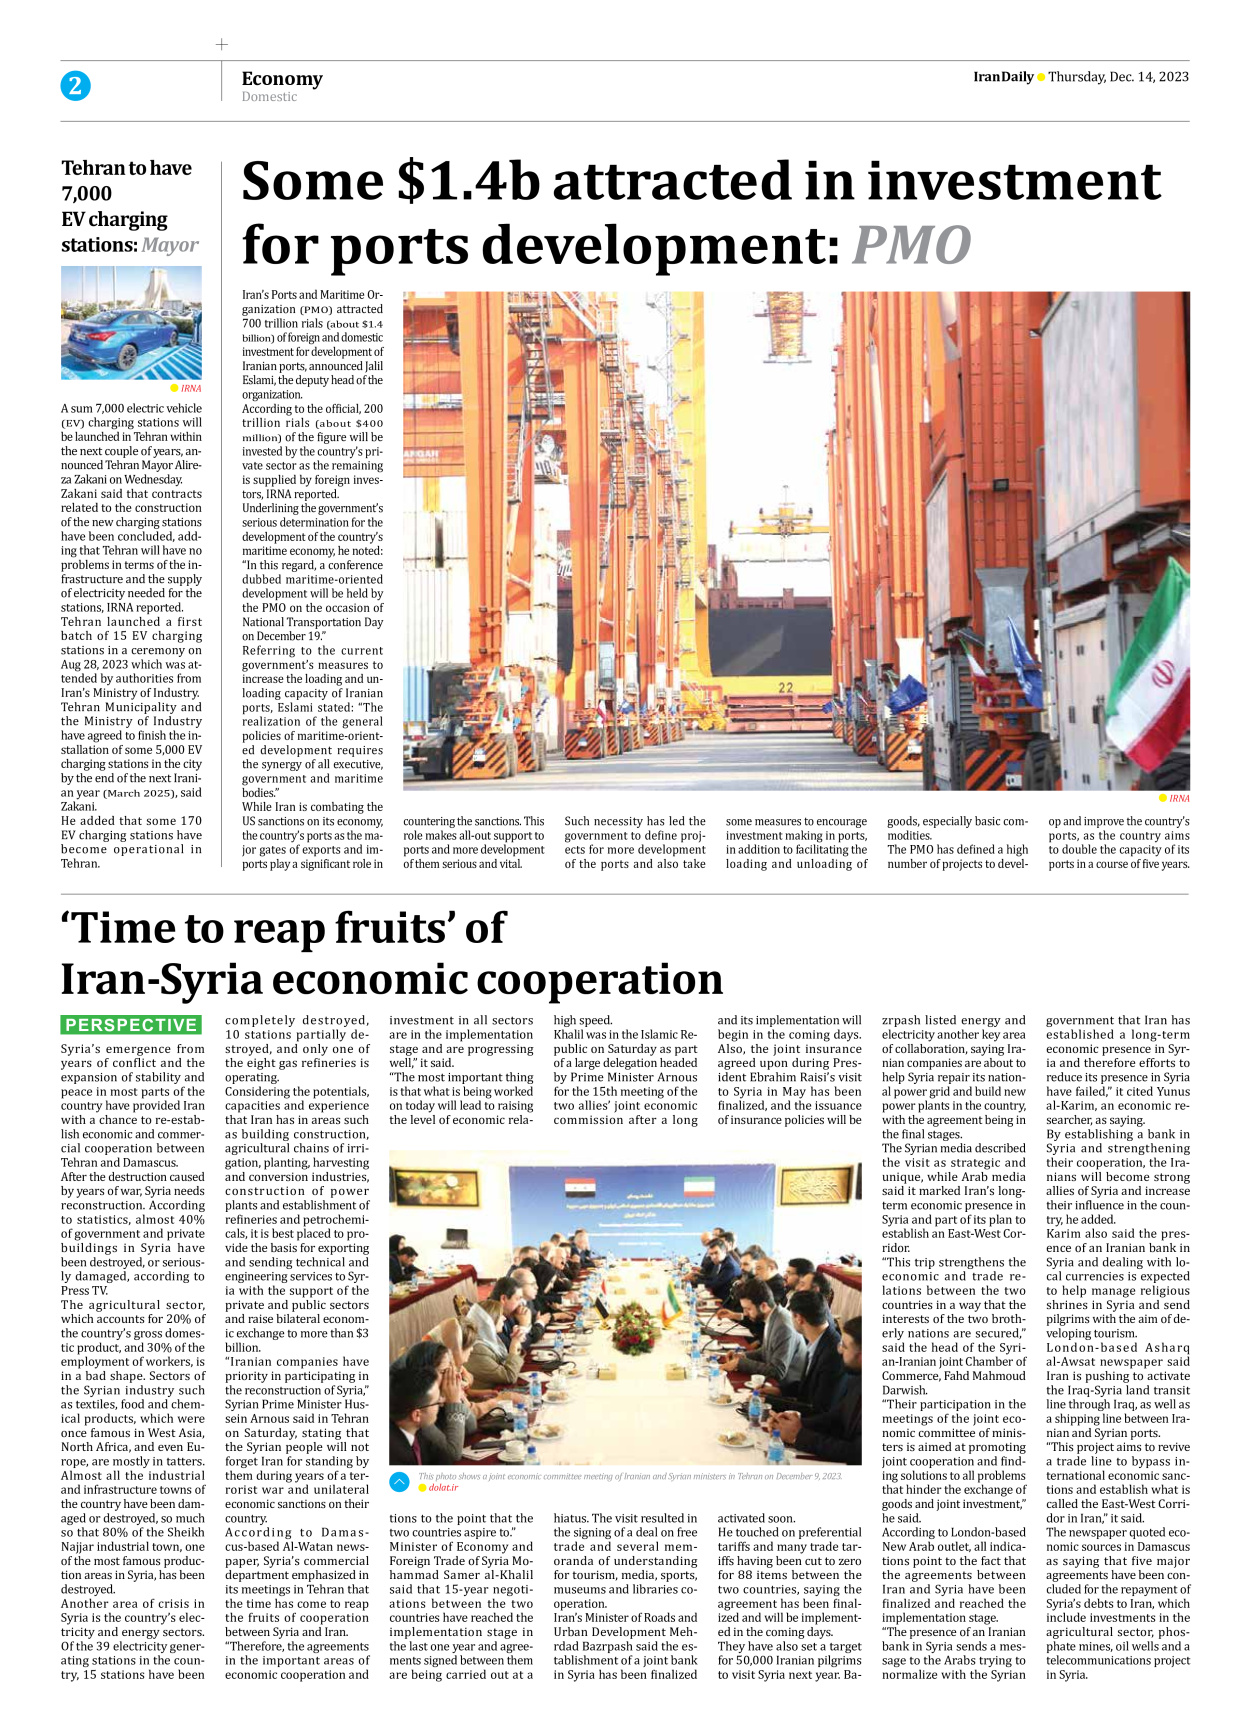 Iran Daily - Number Seven Thousand Four Hundred and Sixty - 14 December 2023 - Page 2